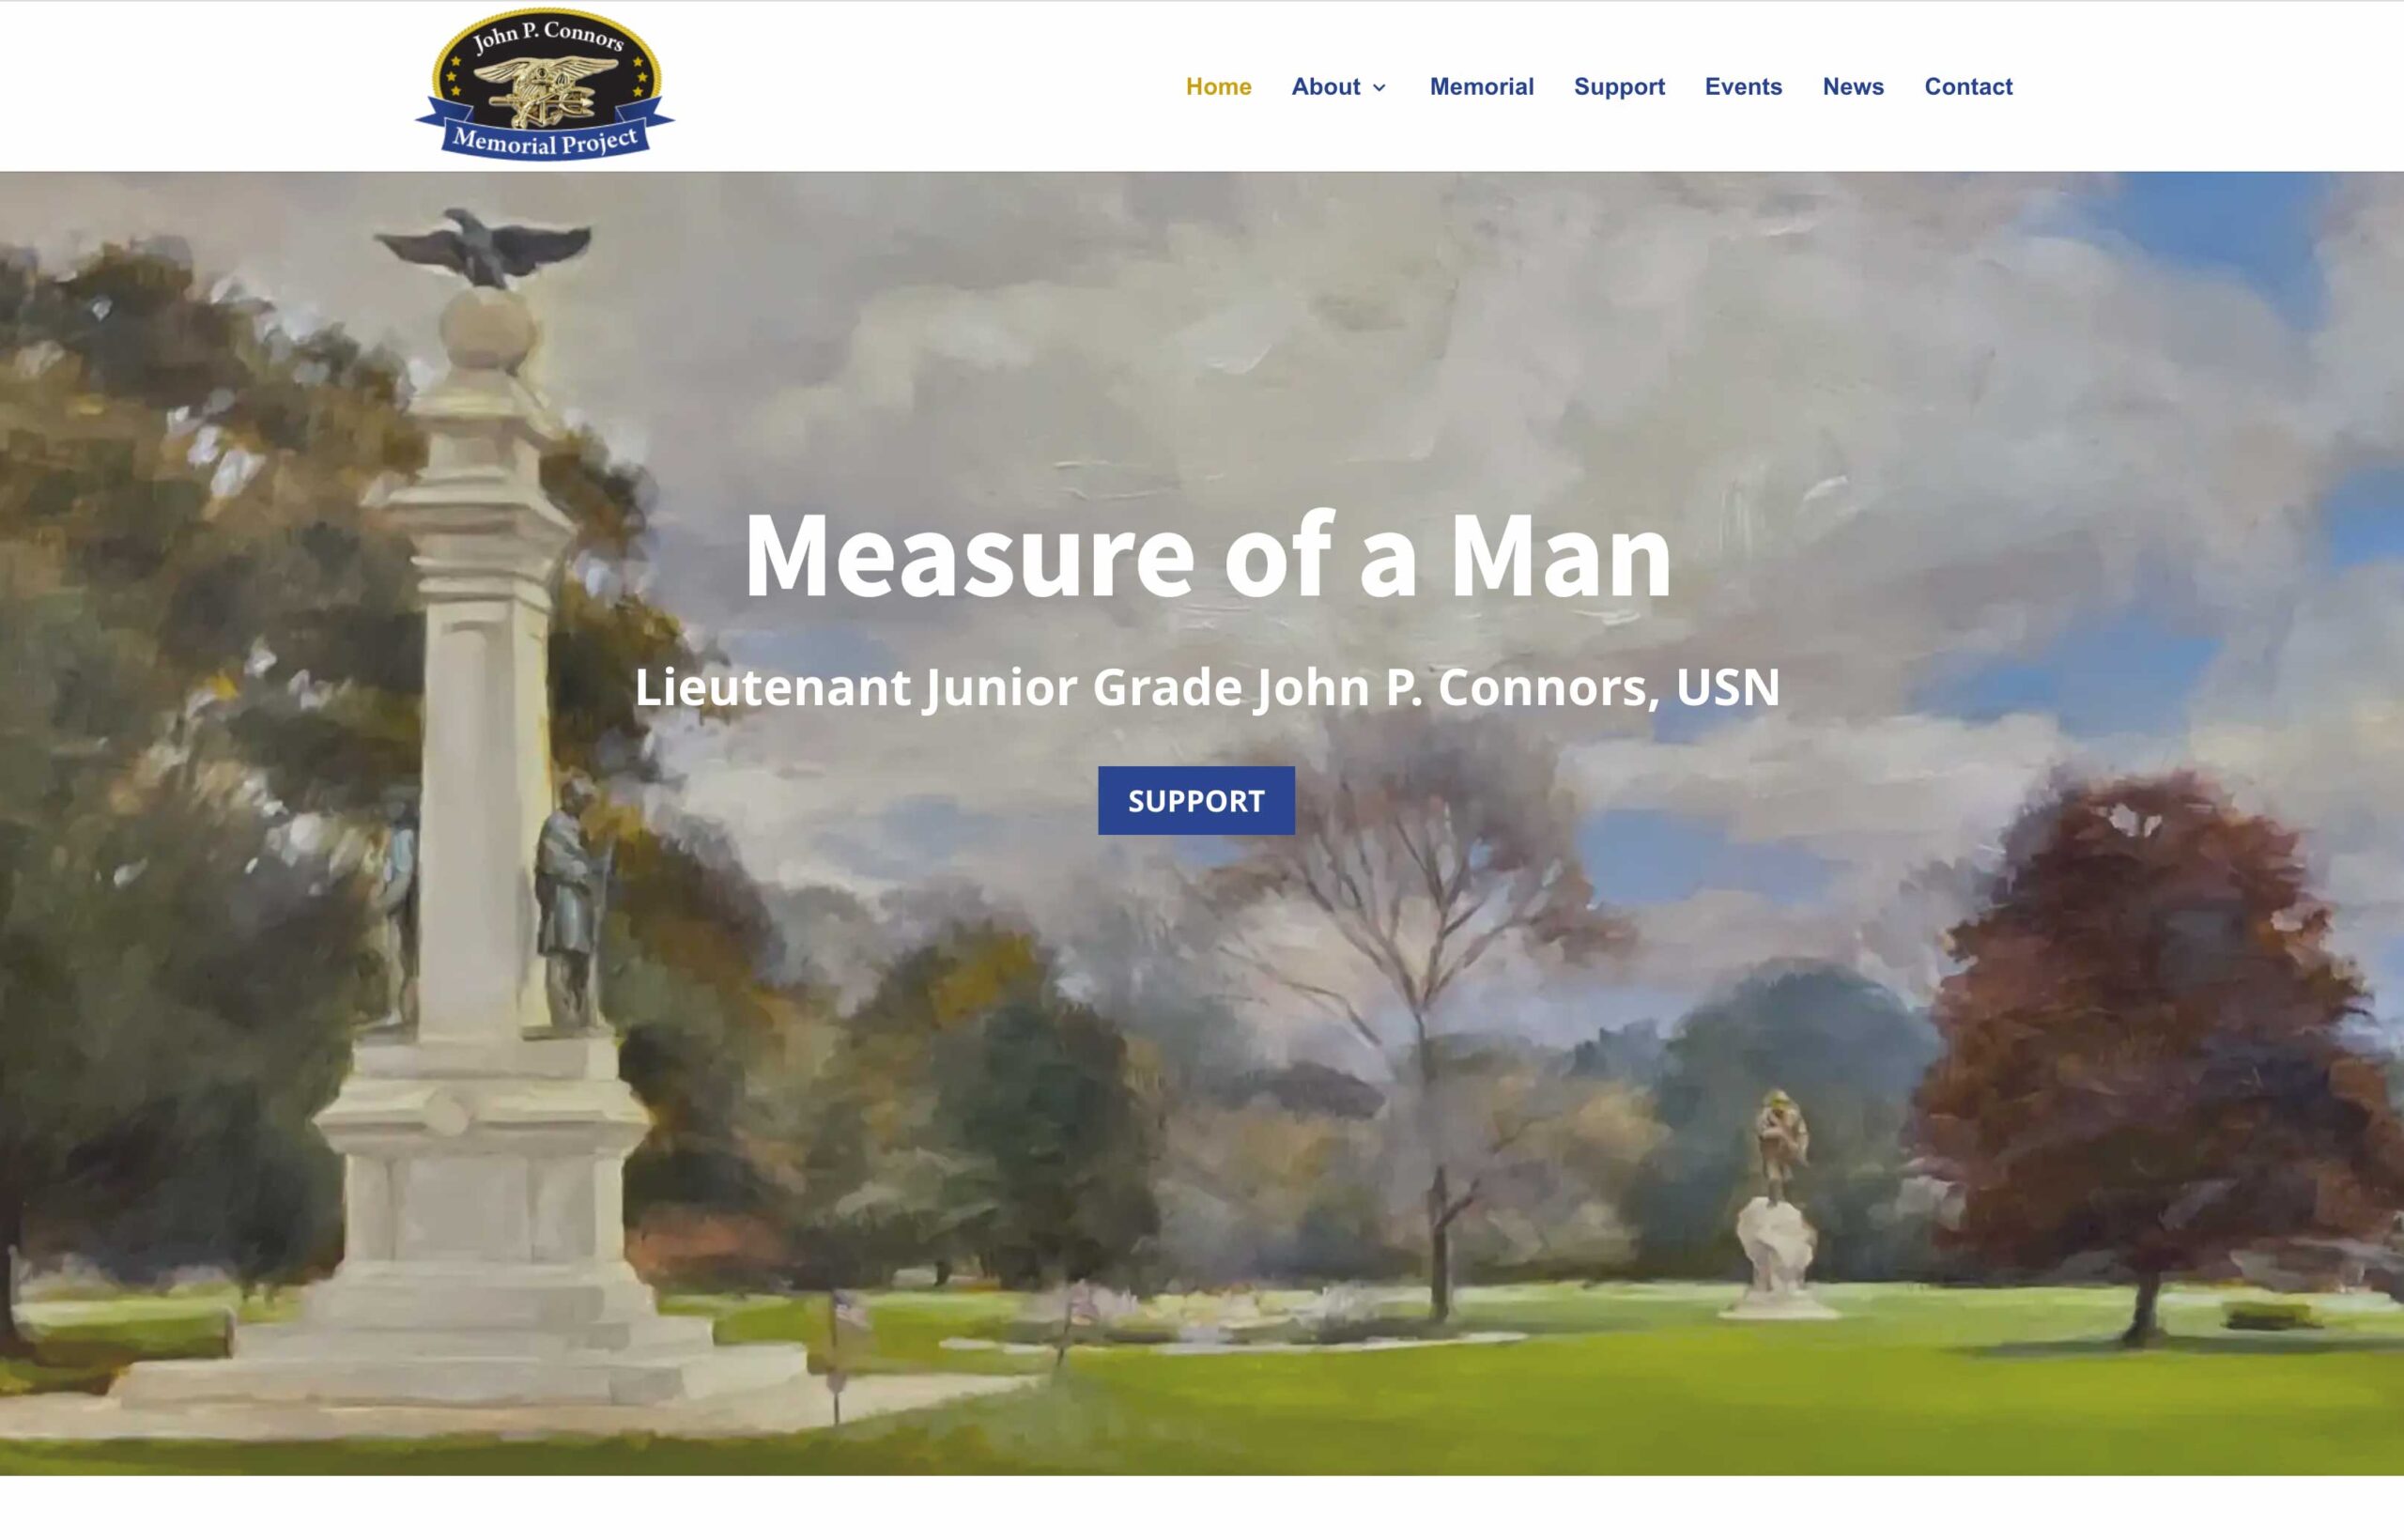 John P Connors Memorial Fund home page website